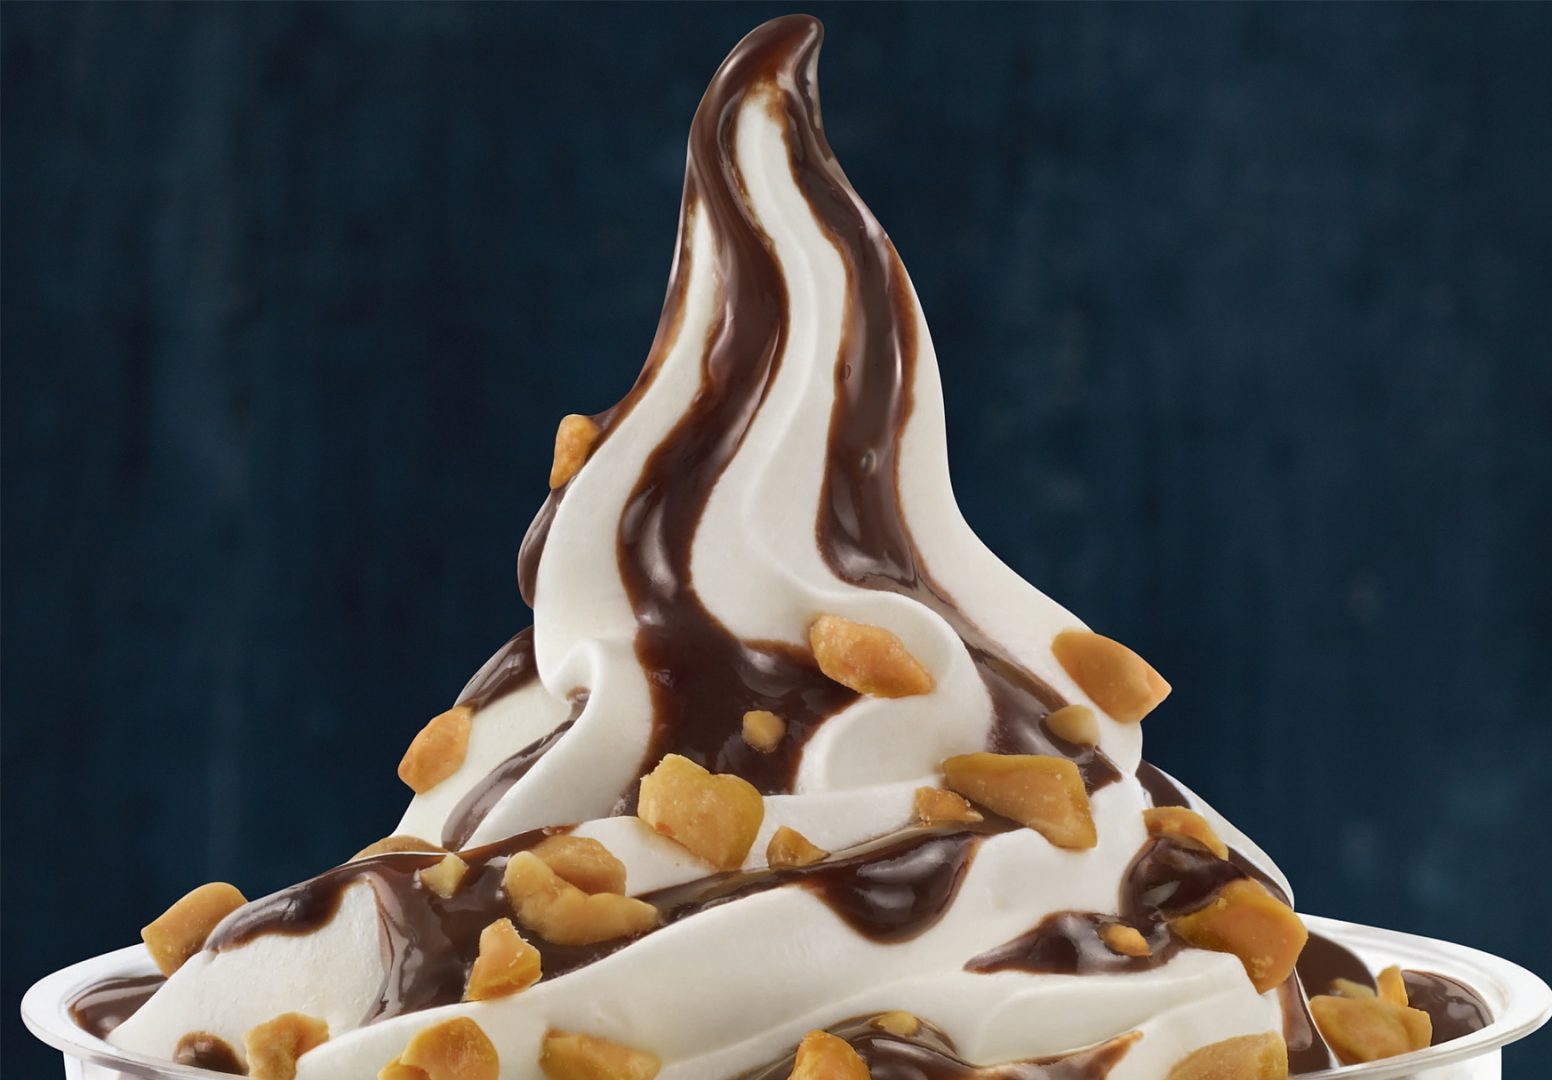 Take This Scale of 1 to 5 McDonald's Quiz & I'll Guess Age Accurately Hot Fudge Sundae